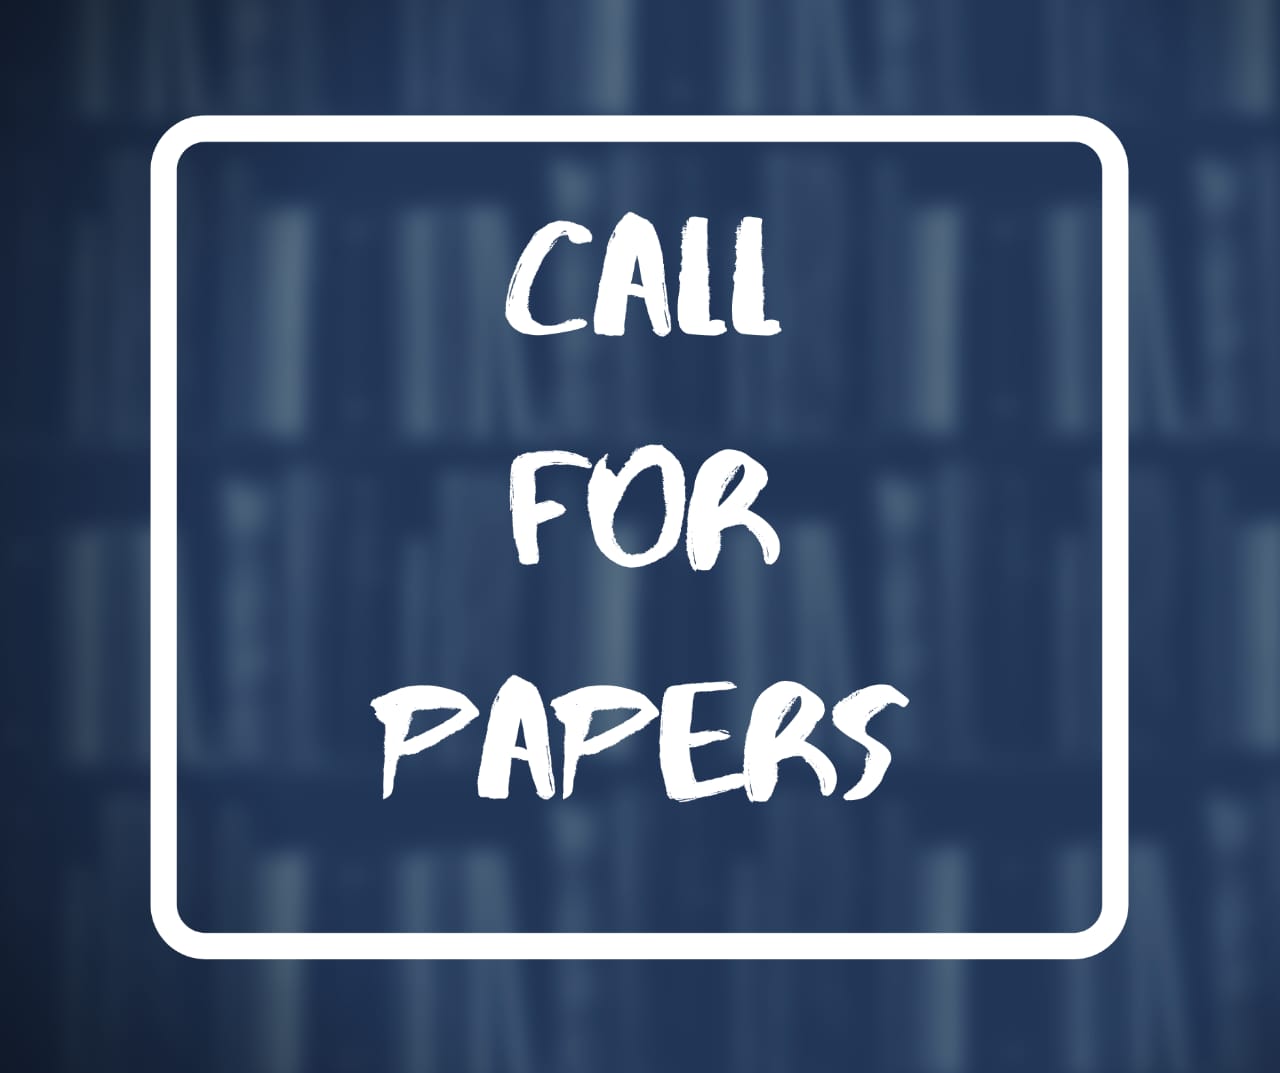 RGNUL Student Research Review (RSRR) Journal [Vol 9 Issue 2]: Submit by Feb 11